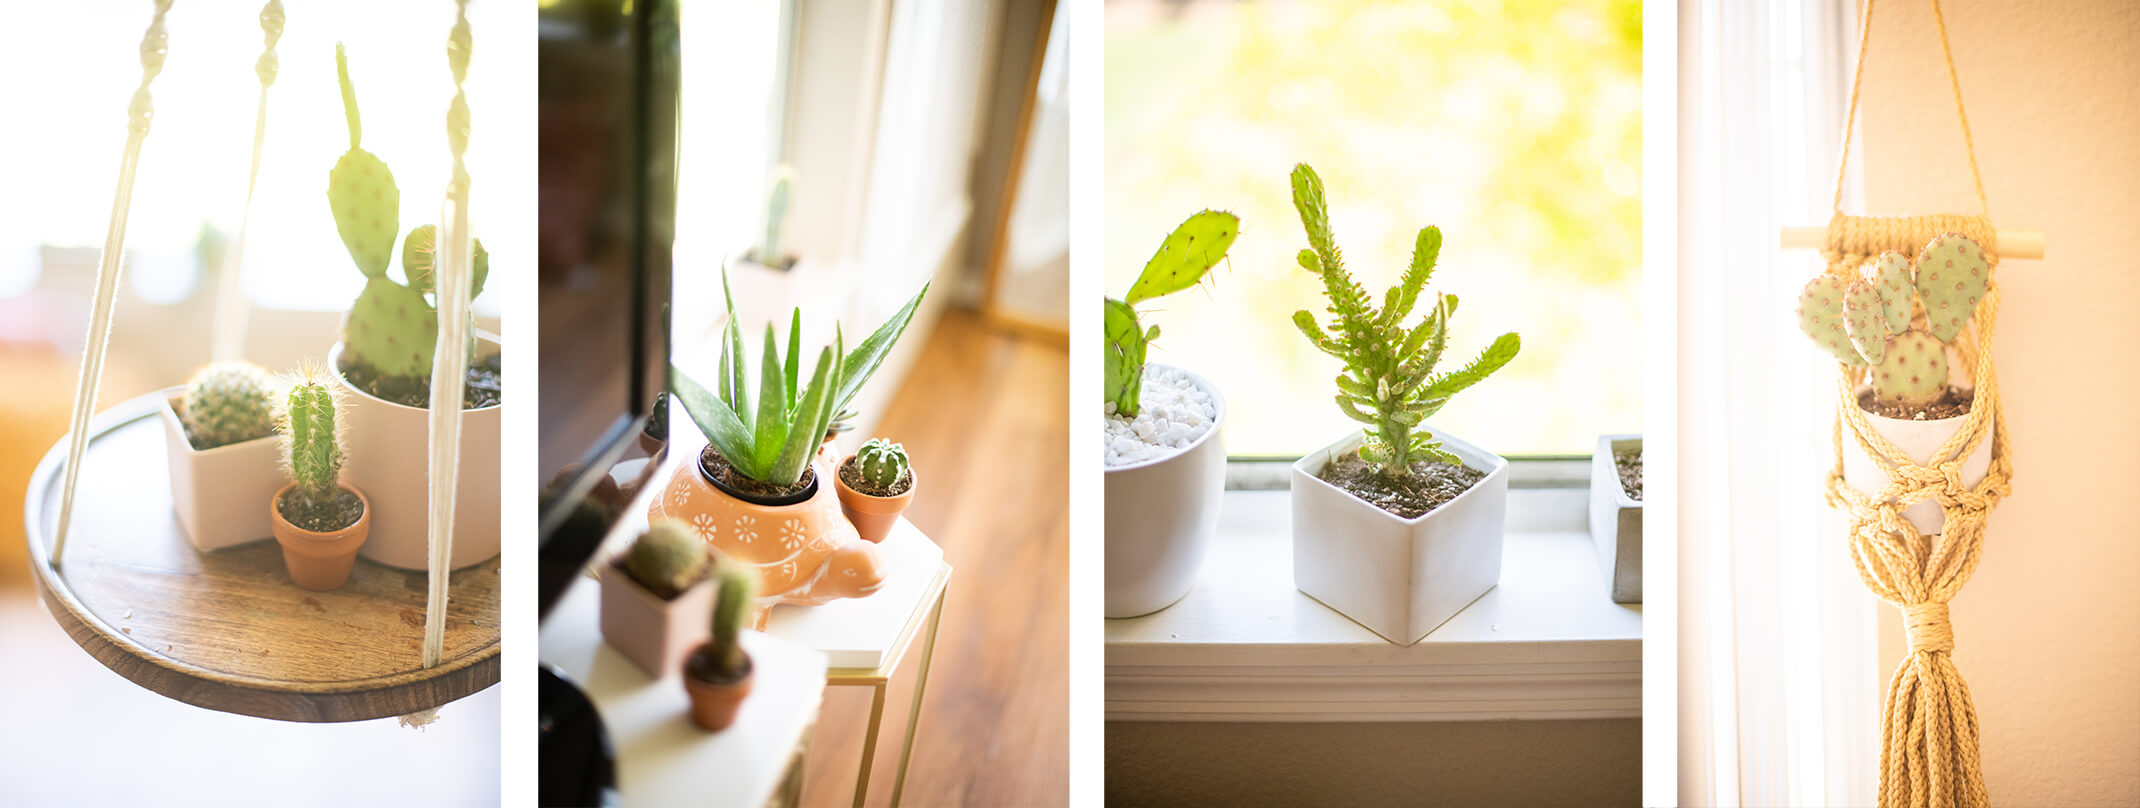 4 images - each with various cactus plants potted and displayed indoors. The second image from the left includes a potted aloe plant.